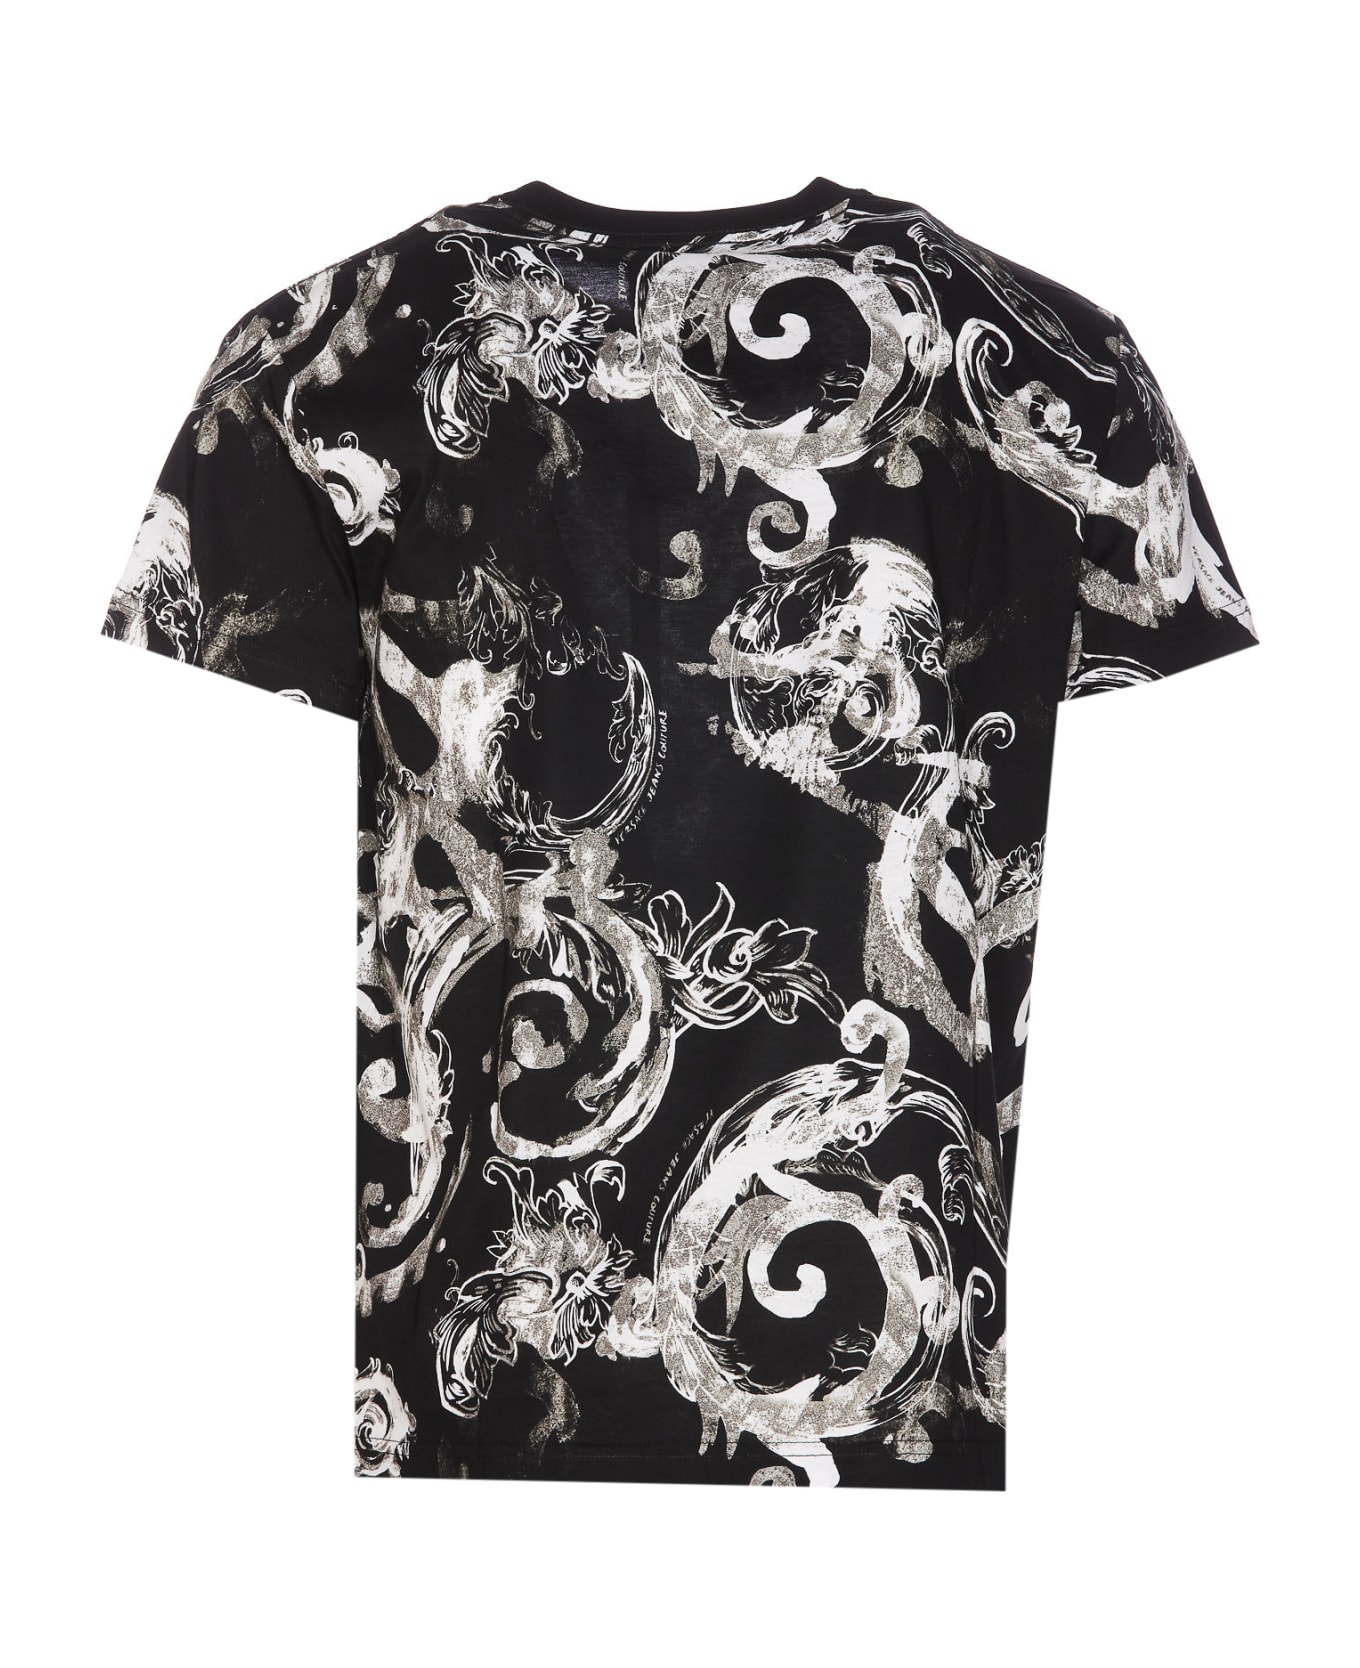 Versace Jeans Couture Watercolour Couture T-shirt - BLACK/WHITE シャツ